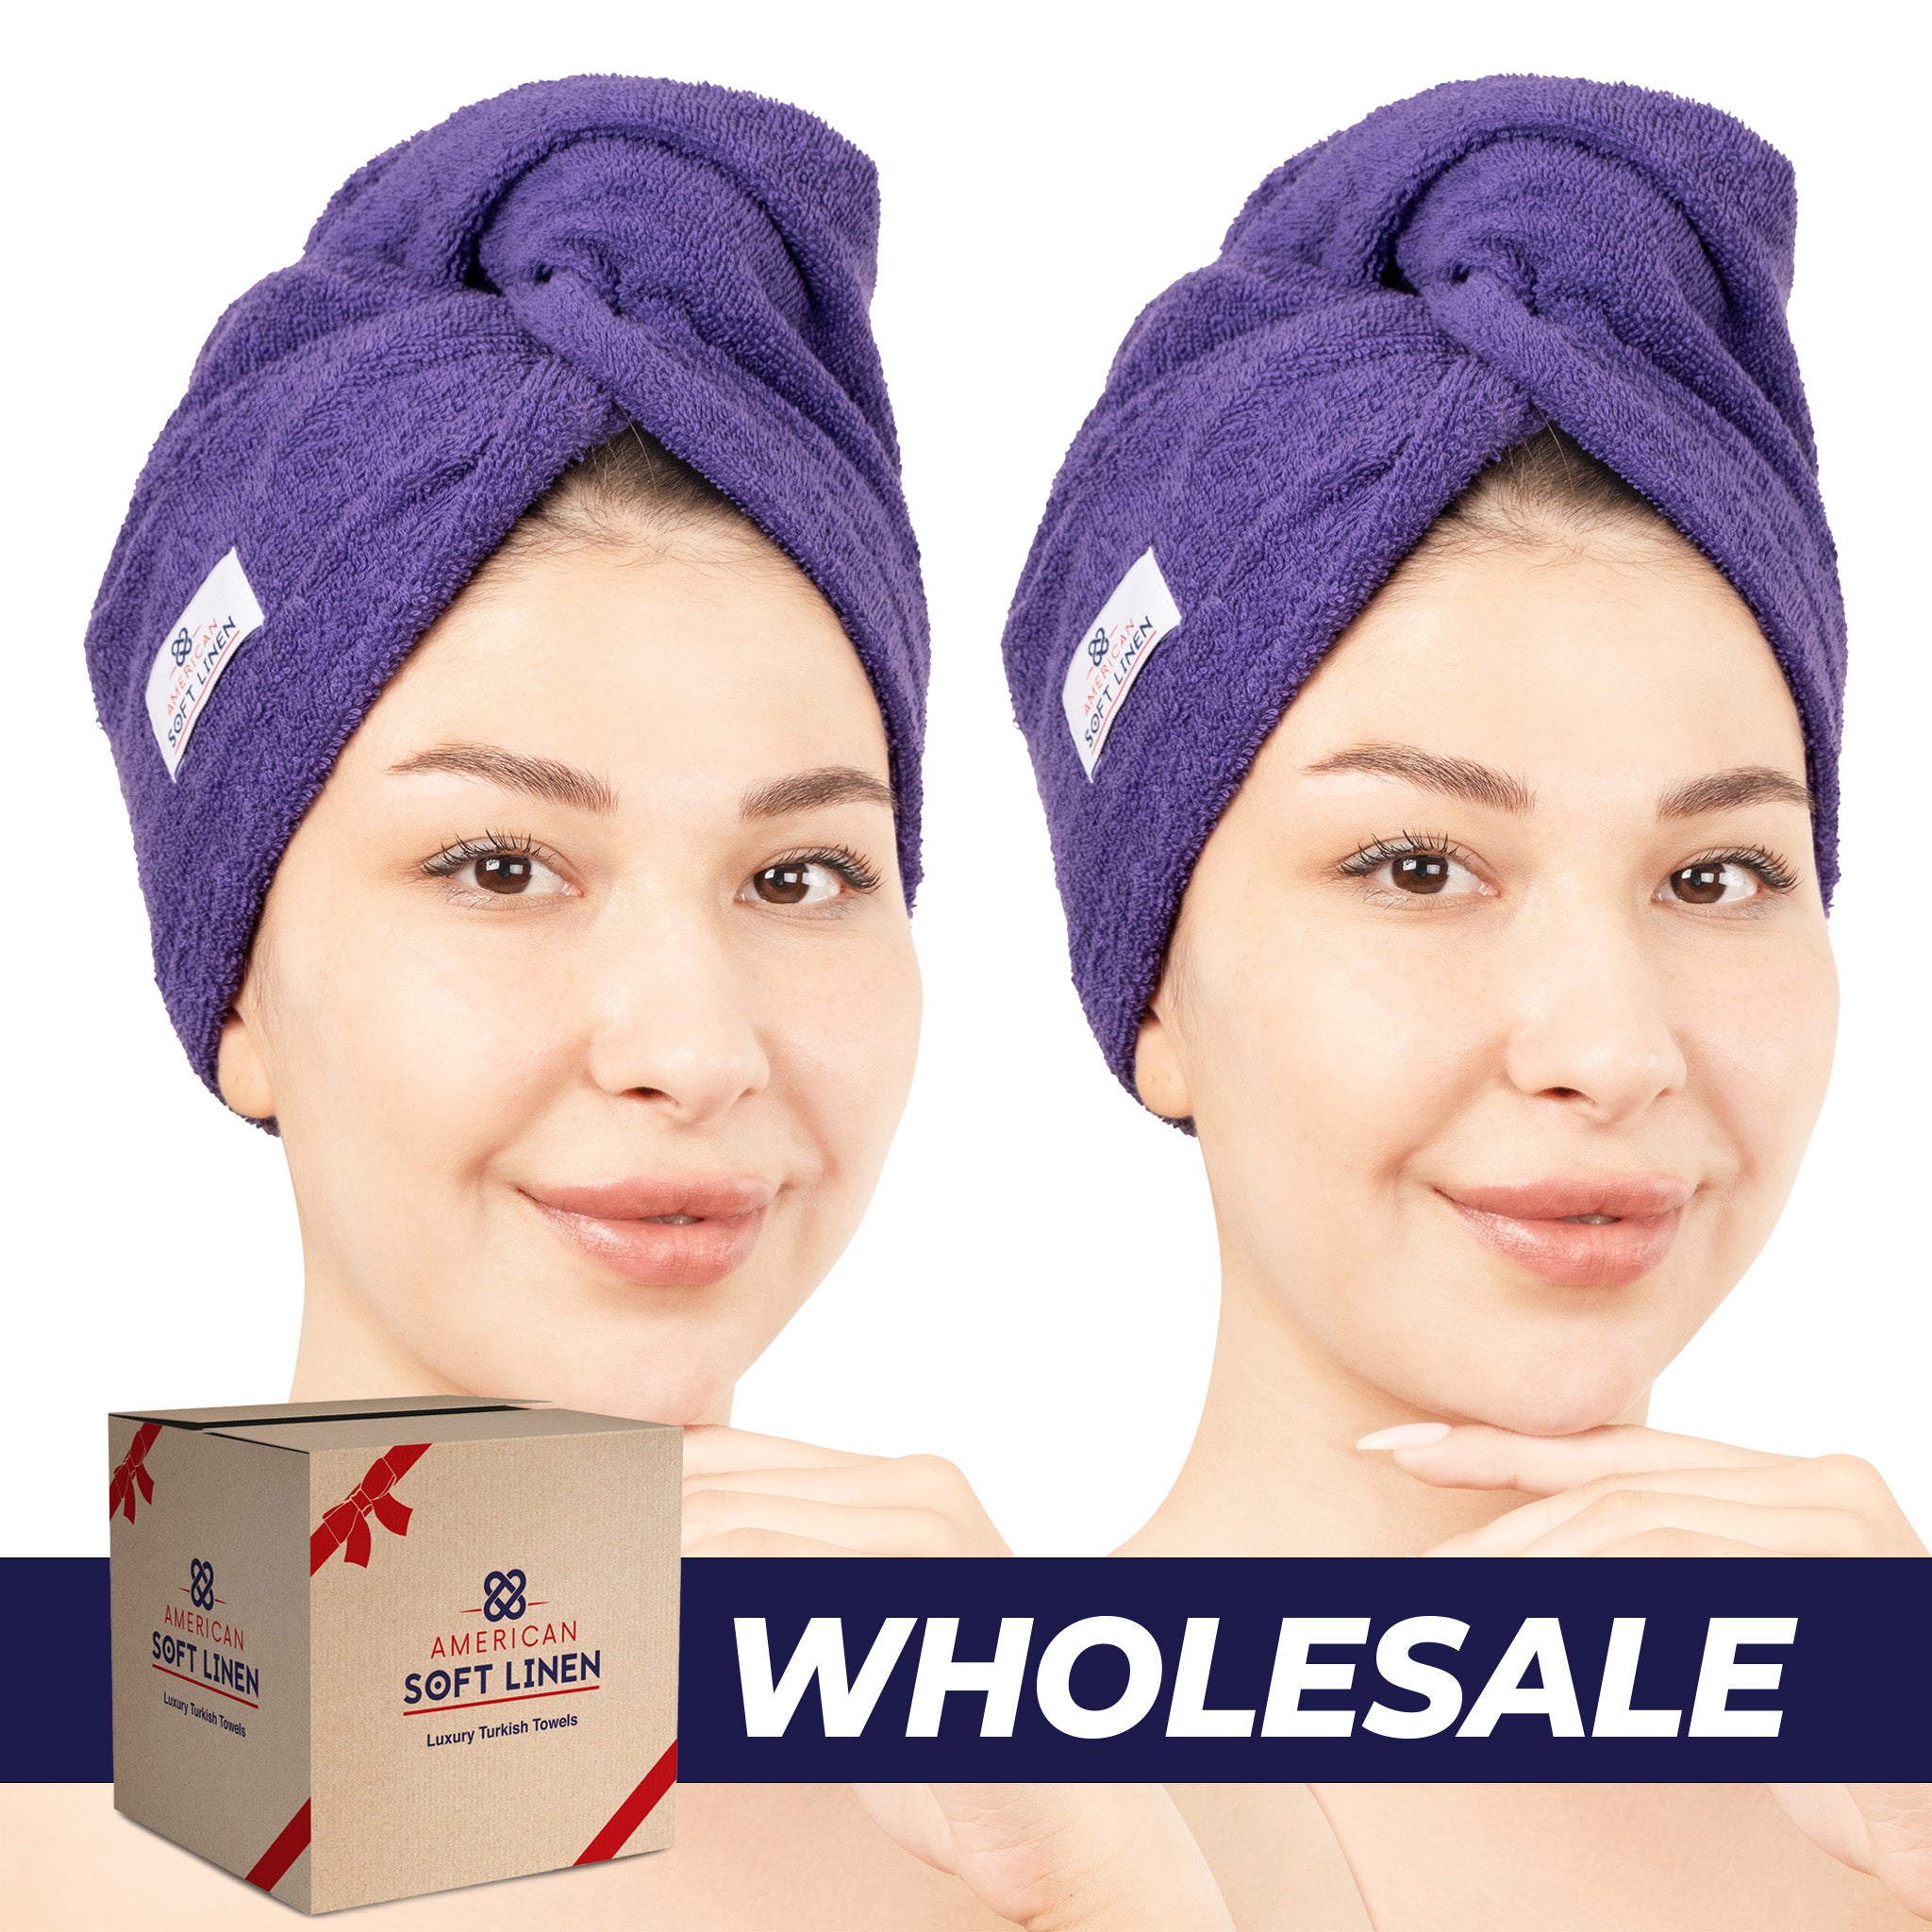 American Soft Linen 100% Cotton Hair Drying Towels for Women 2 pack 75 set case pack purple-0